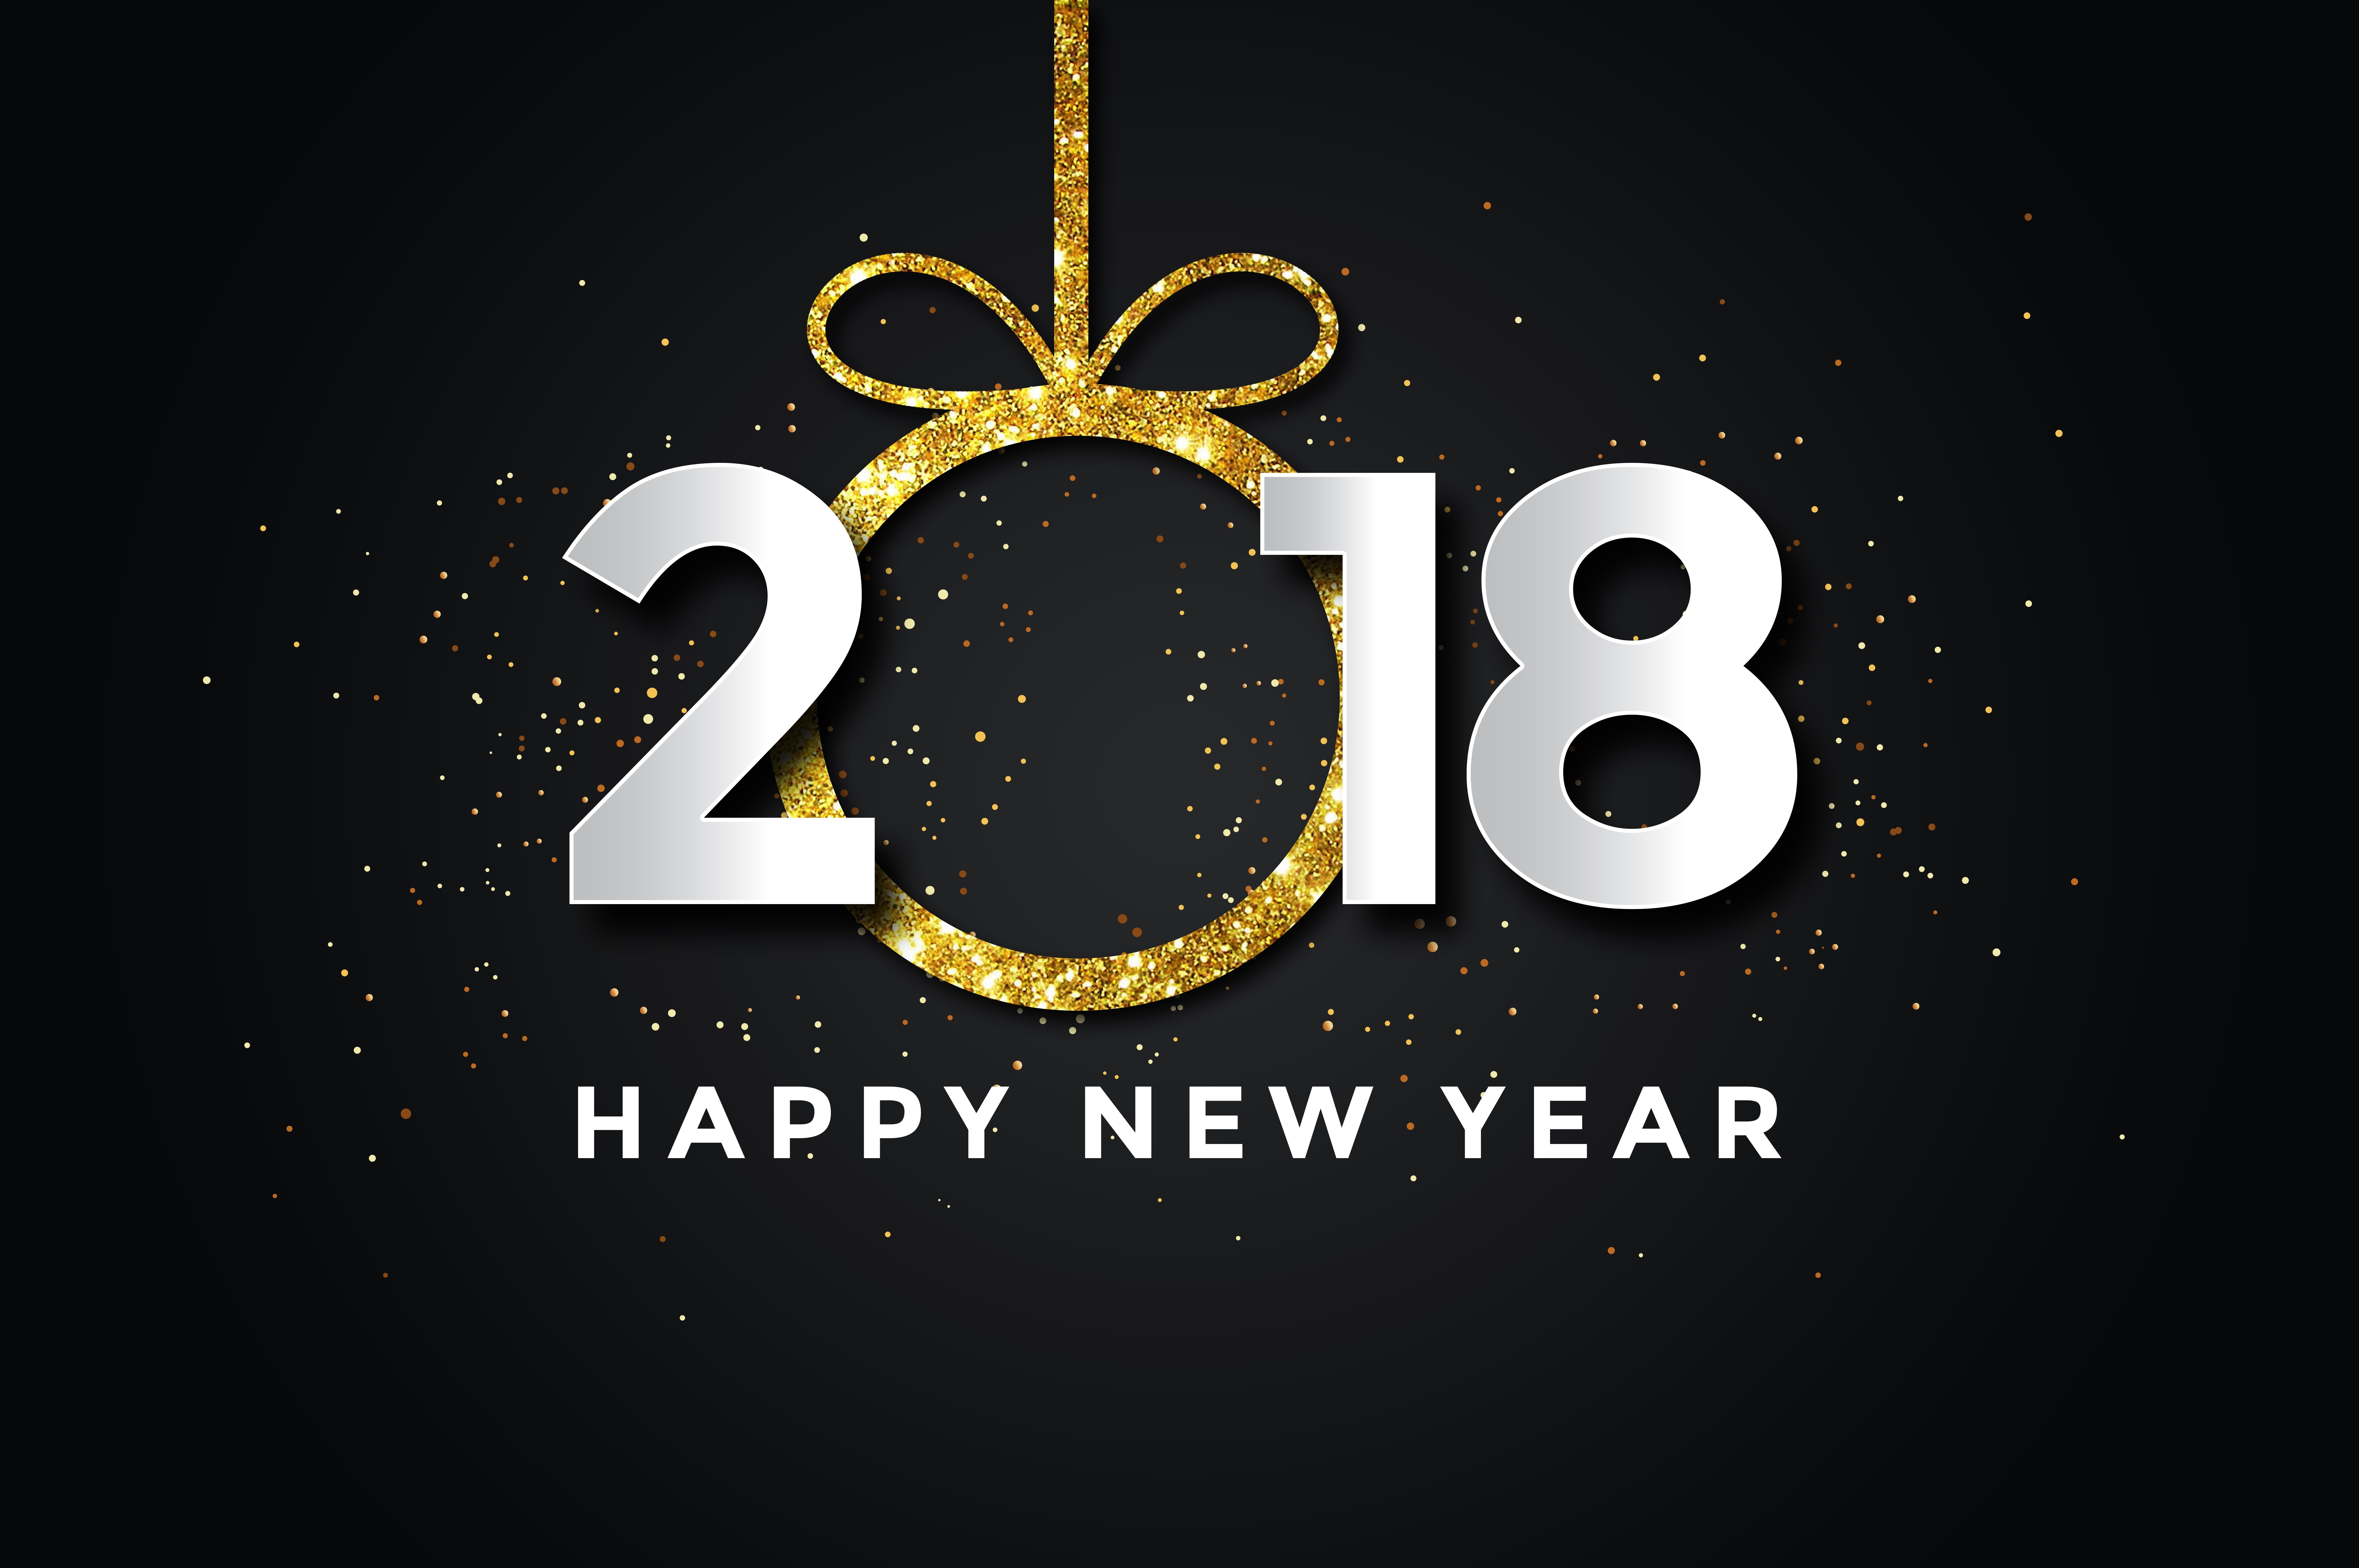 holiday, new year 2018, happy new year, new year